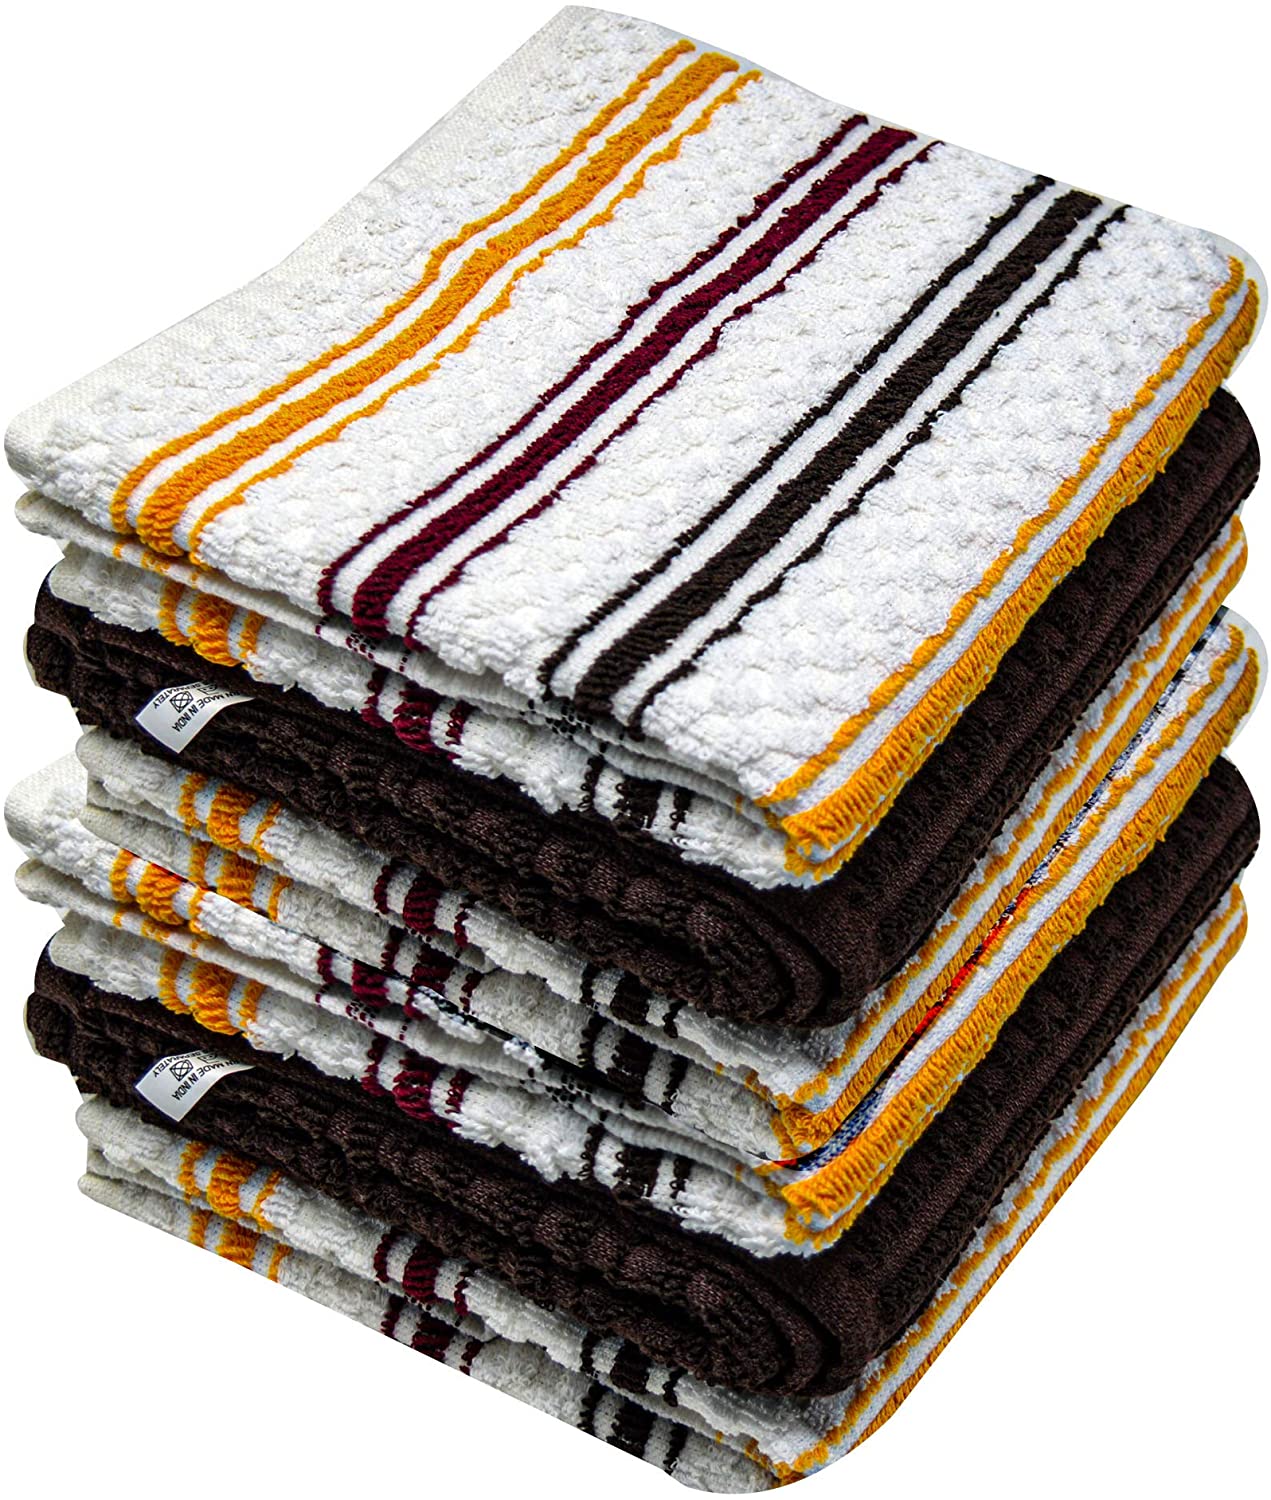 Kitchen Towel - Solids and Stripes Assorted Popcorn Terry